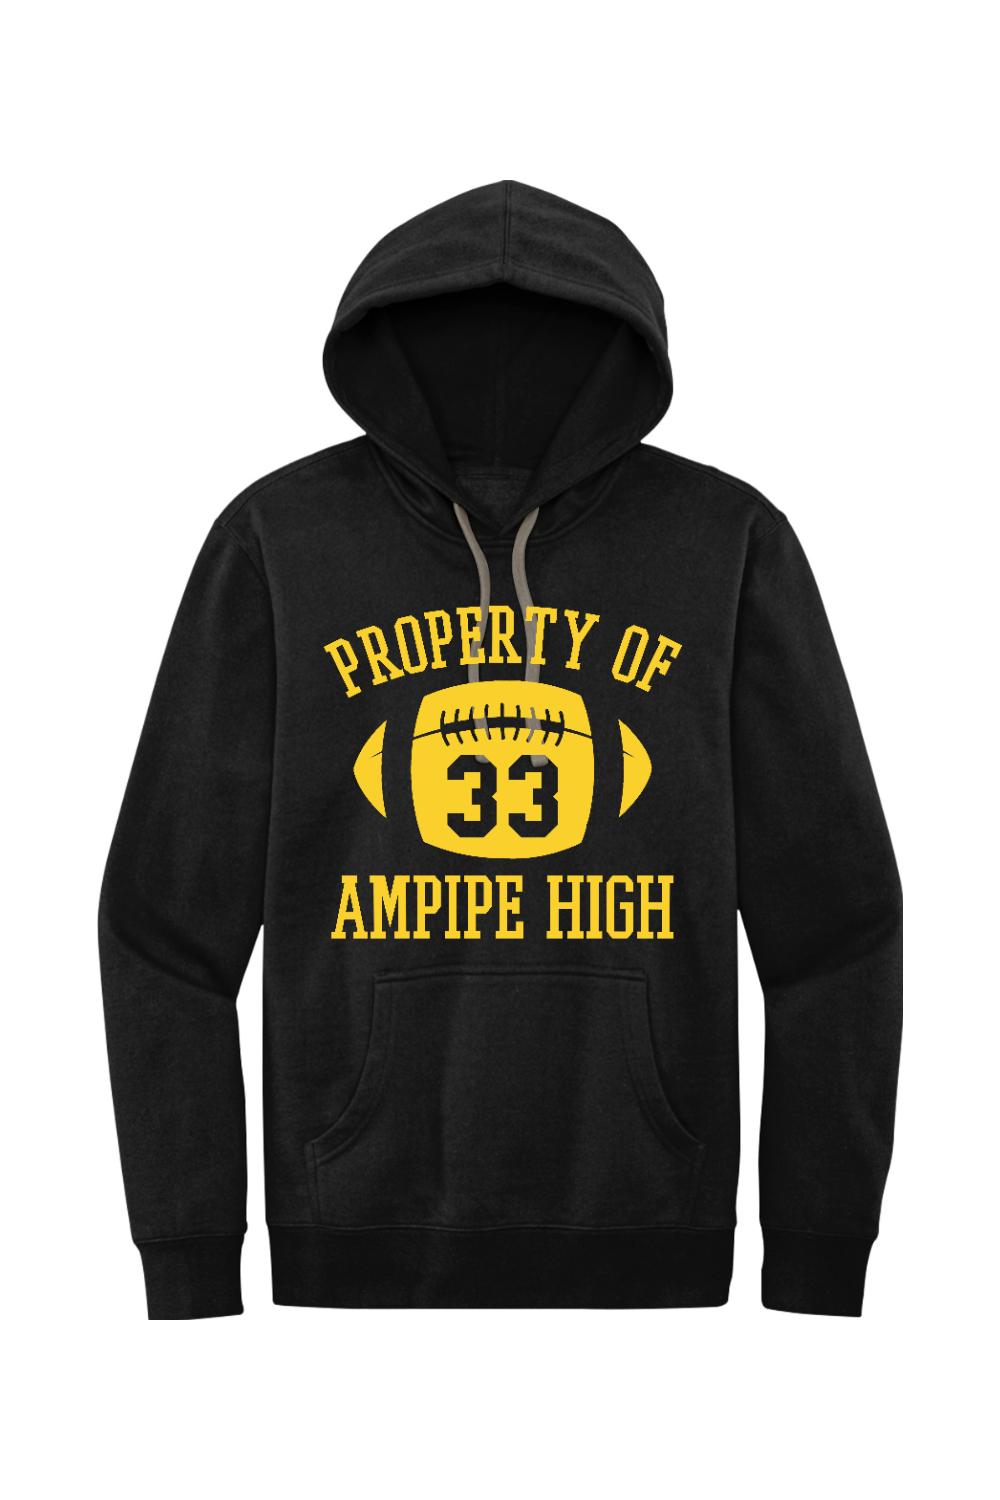 Property of Ampipe High (All the Right Moves)- Fleece Hoodie - Yinzylvania